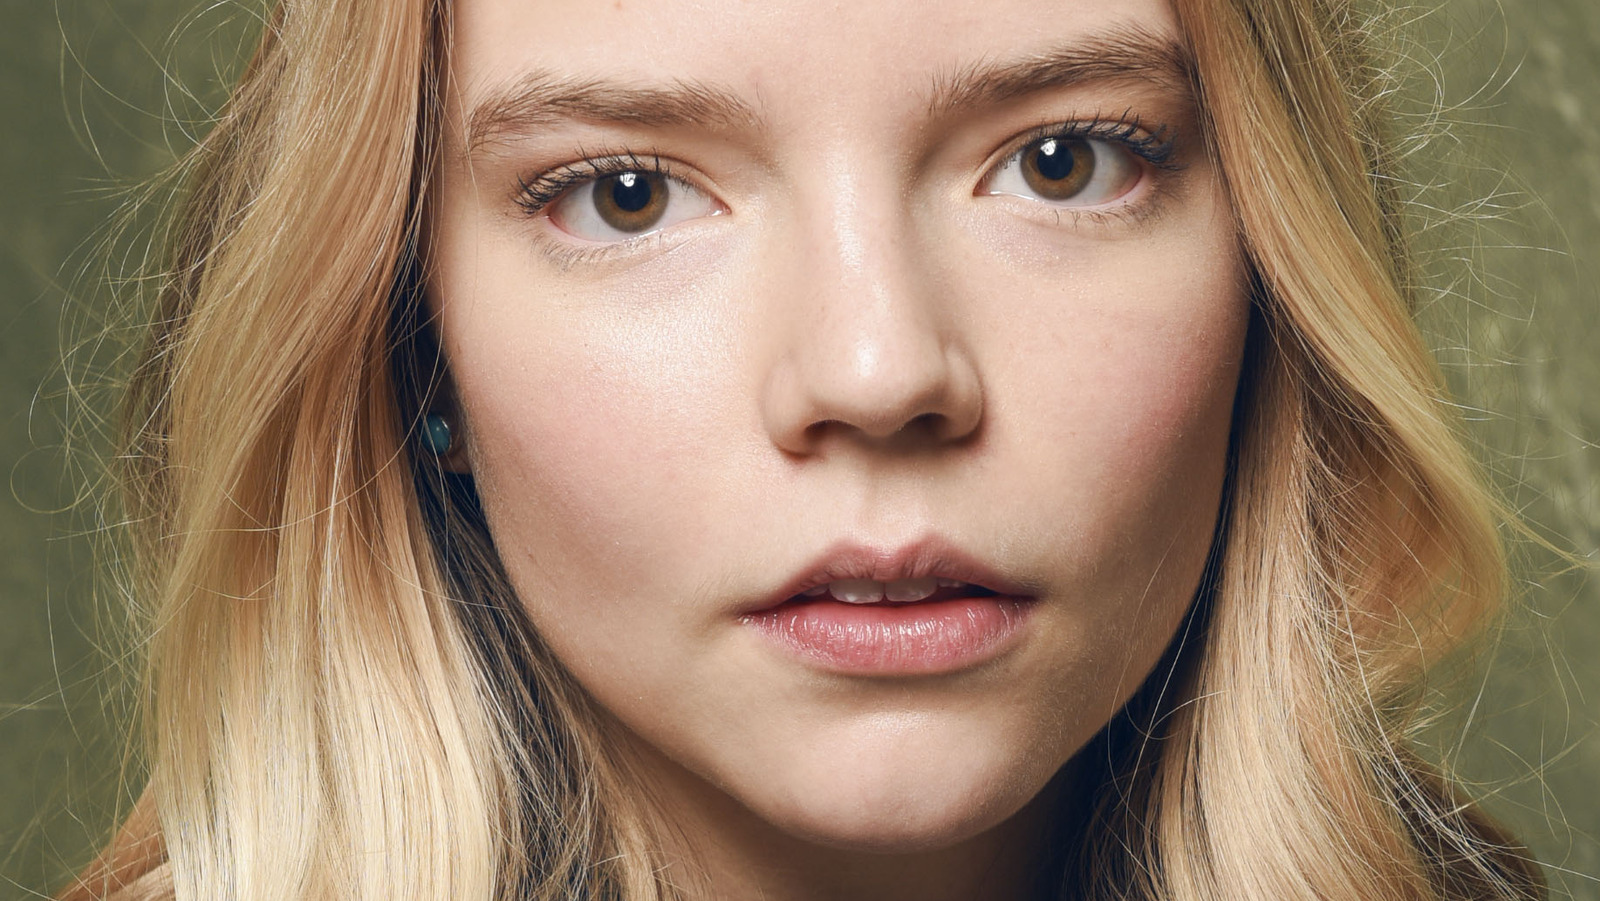 Anya Taylor-Joy reveals she was bullied over her looks while